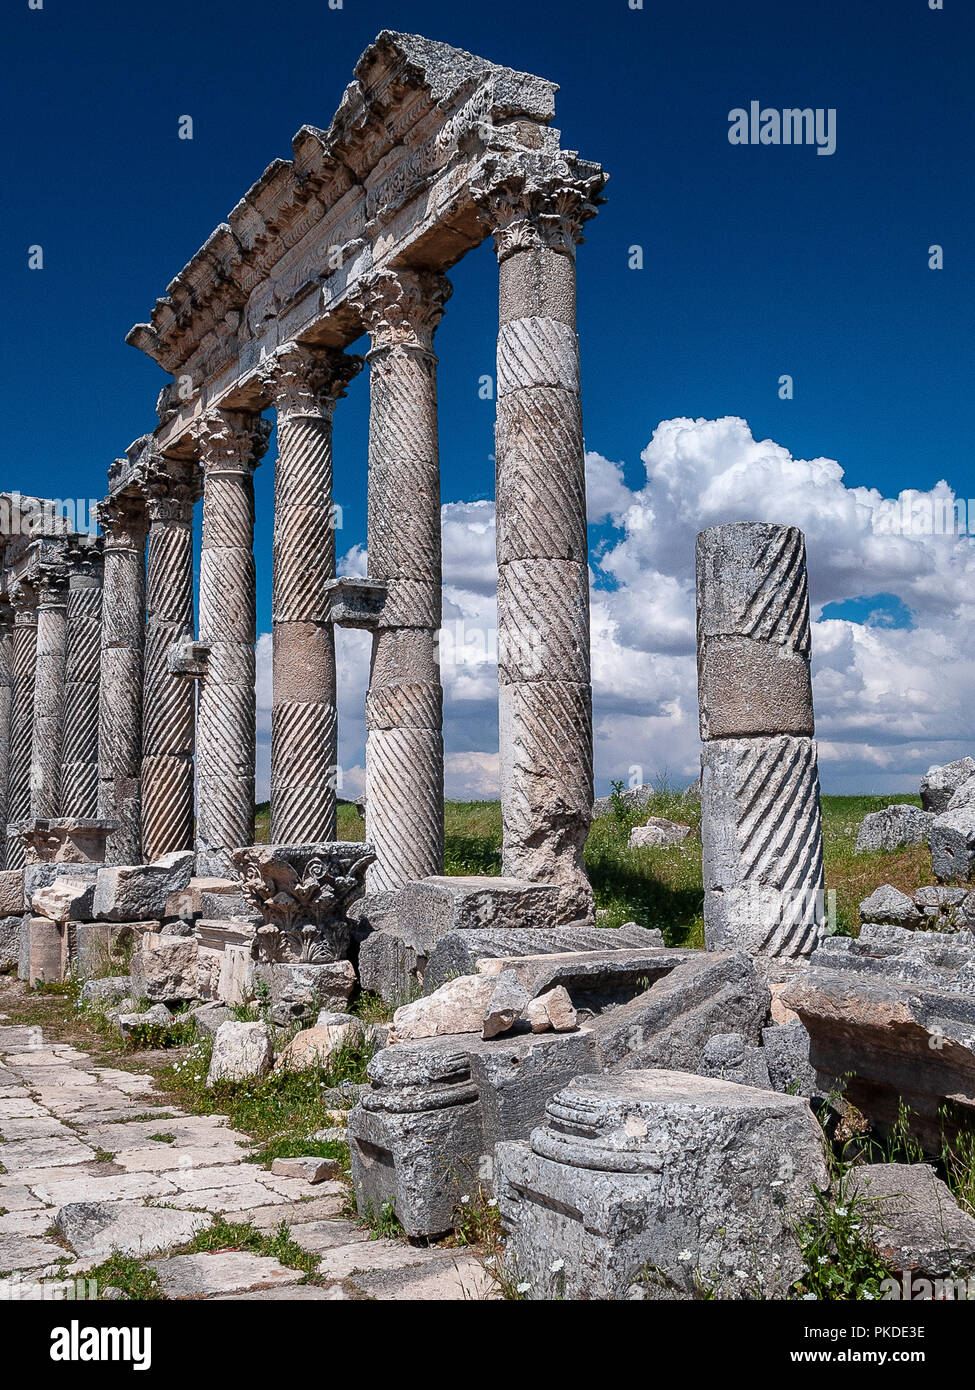 Apamea (also known as Afamia), the ancient Greek and Roman city. The site is located near Qalaat al-Madiq, about 60 km to the northwest of Hama, Syria Stock Photo